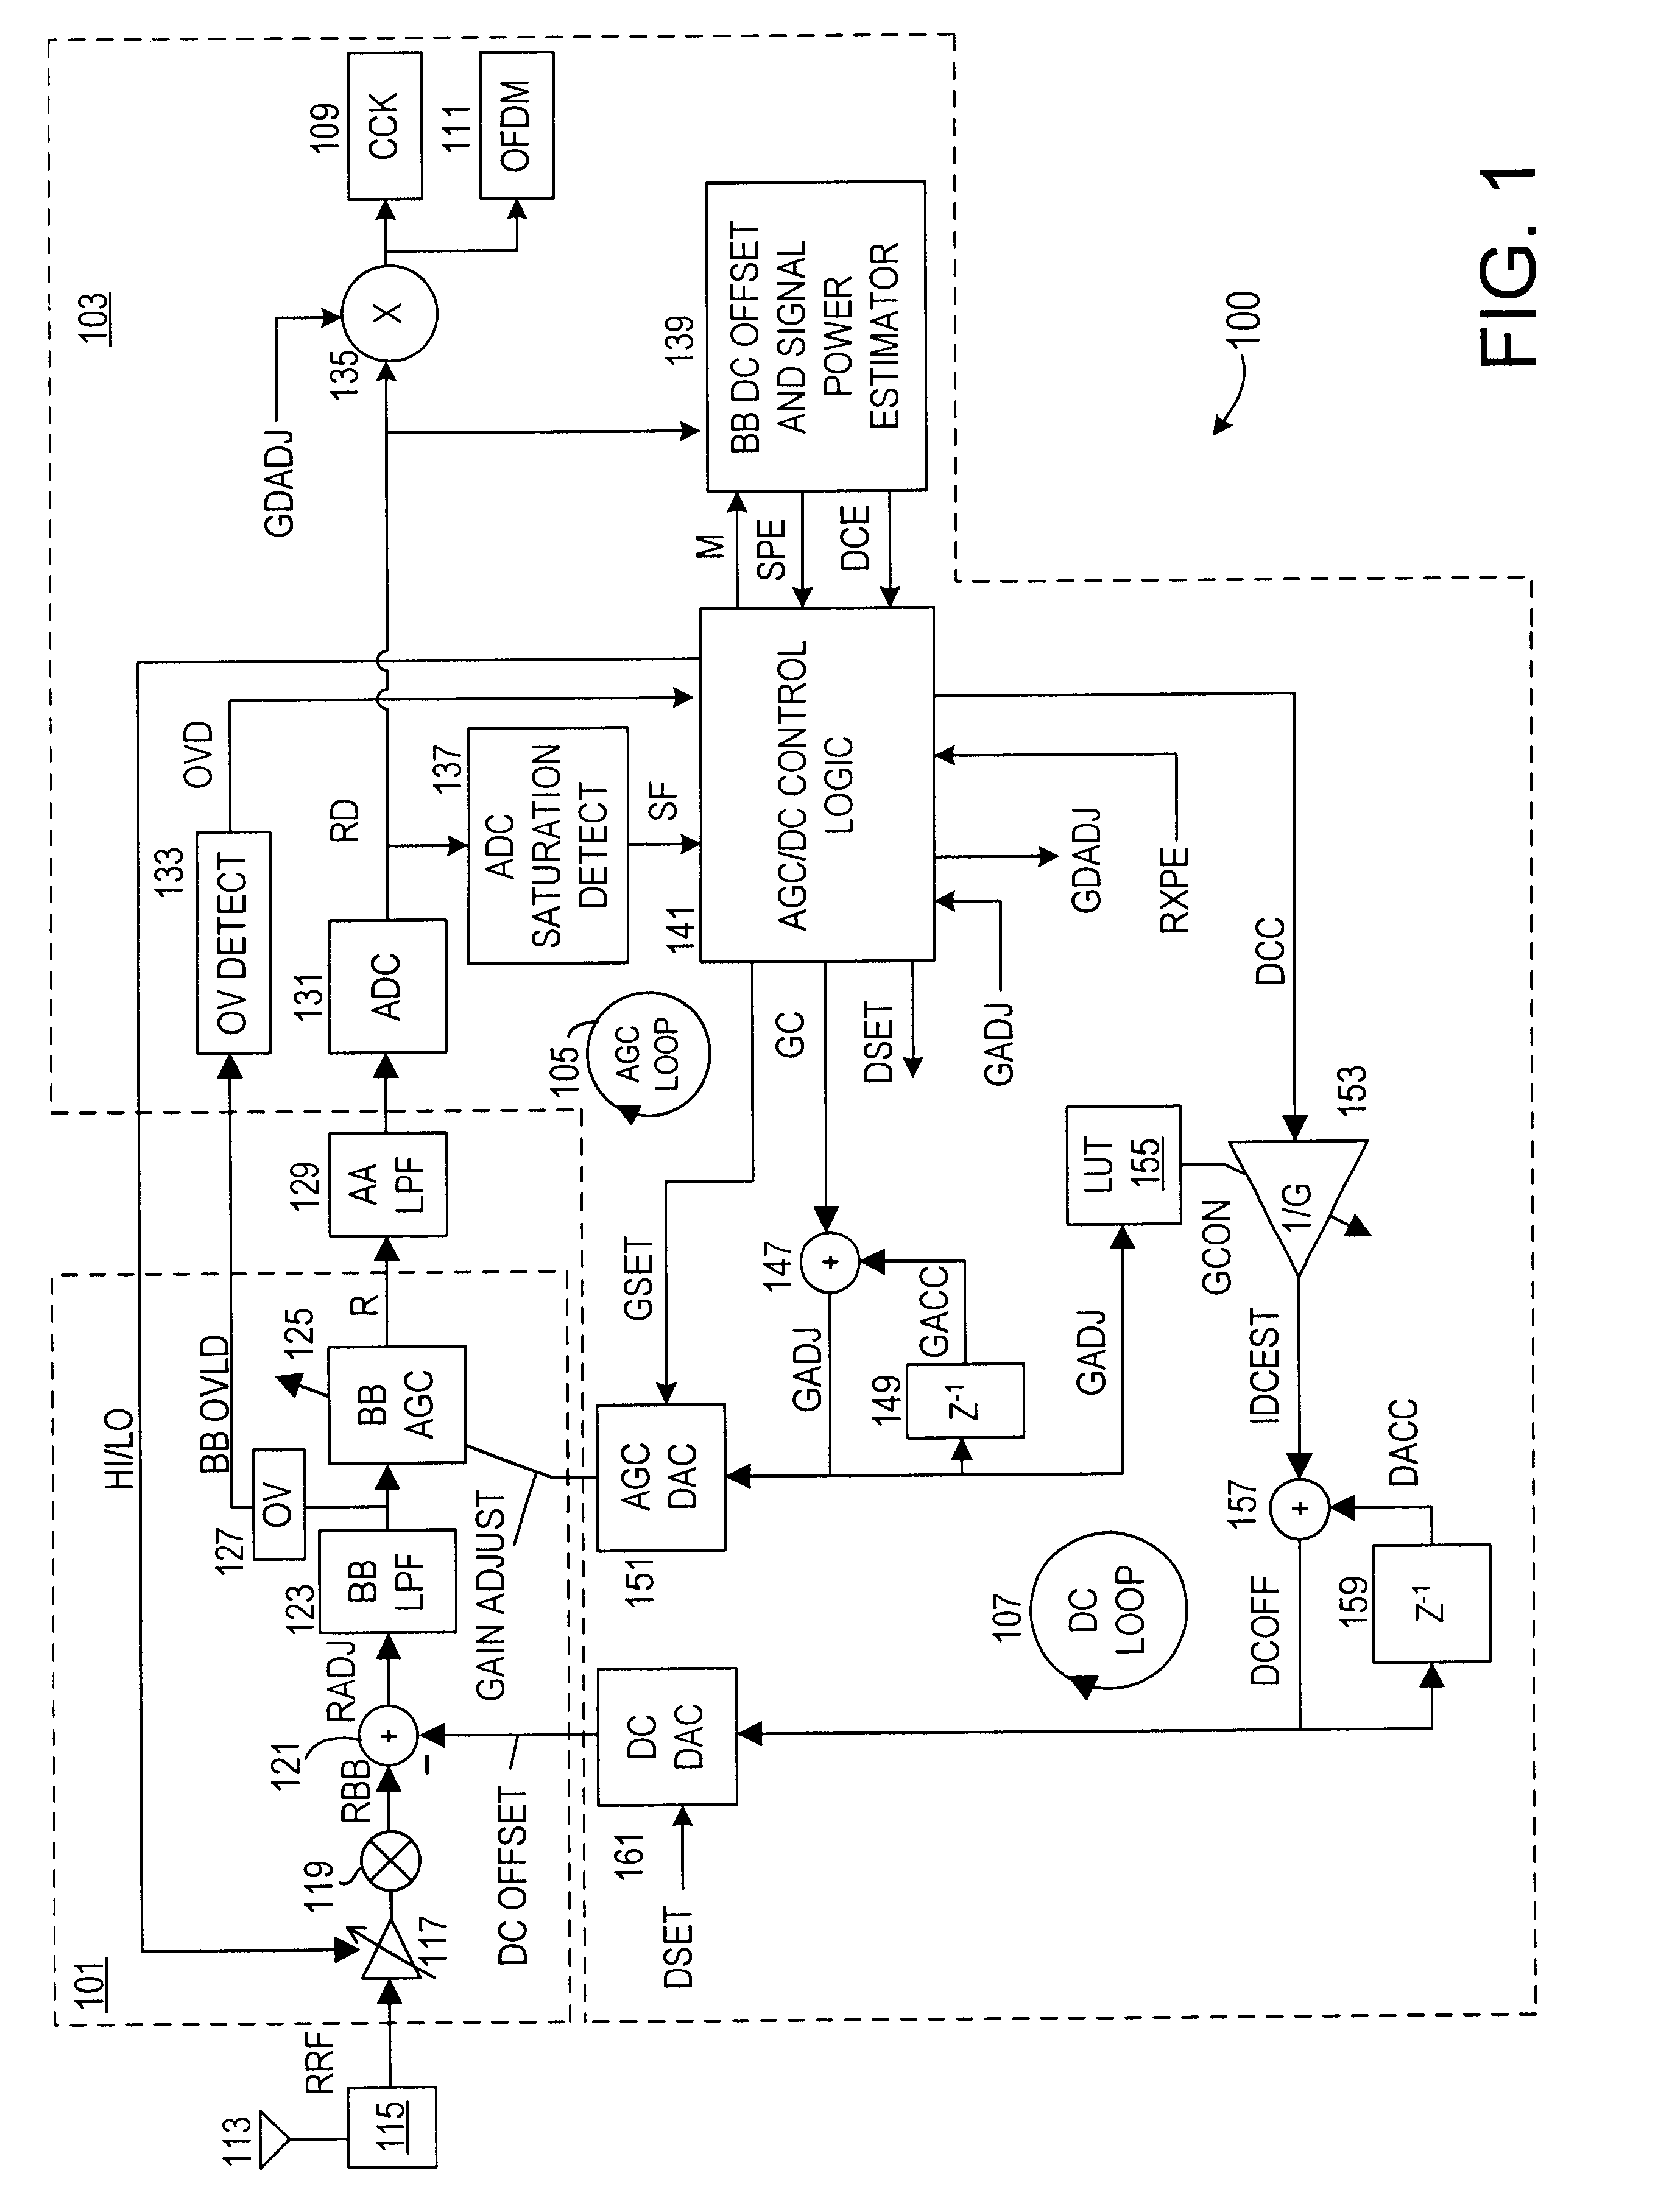 Automatic gain control system and method for a ZIF architecture